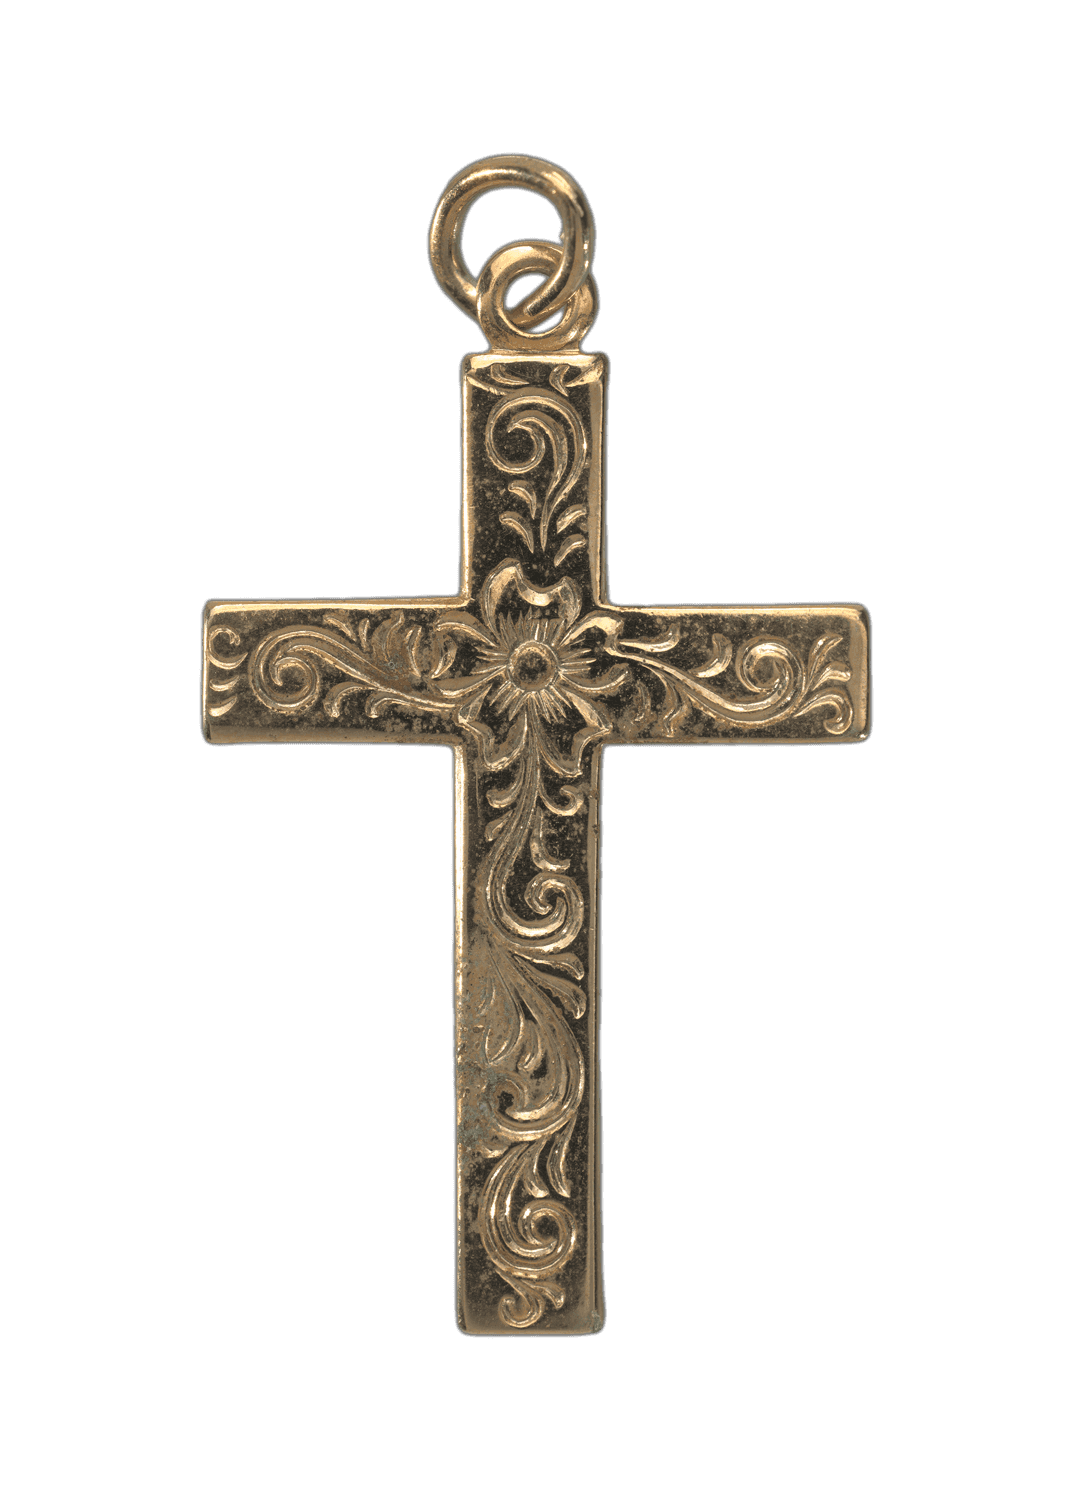 A decorative cross pendant with a small jump ring. The decorative pattern has a wavy, florally look.